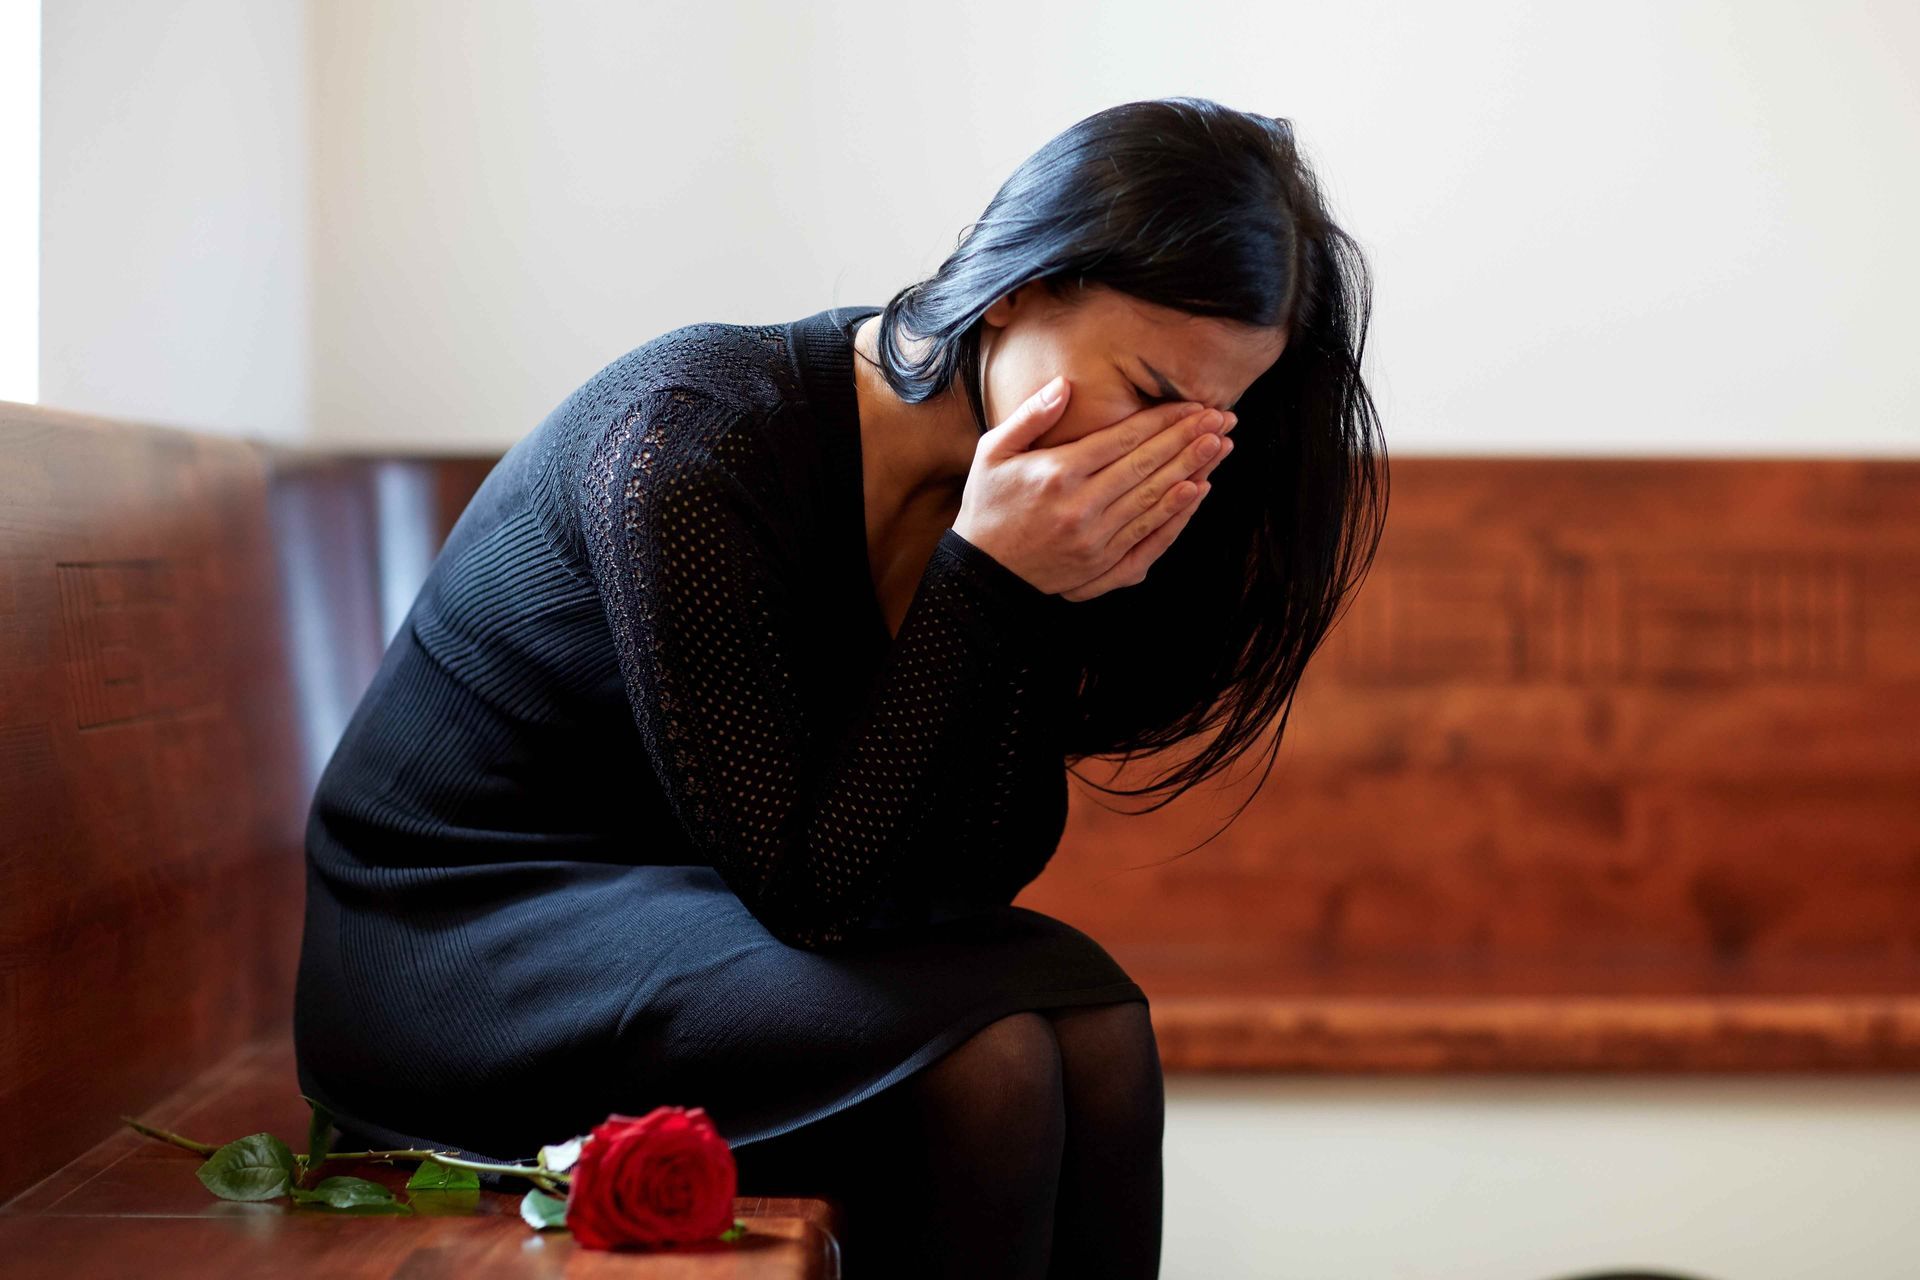 A woman is sitting on a bench with a red rose and crying